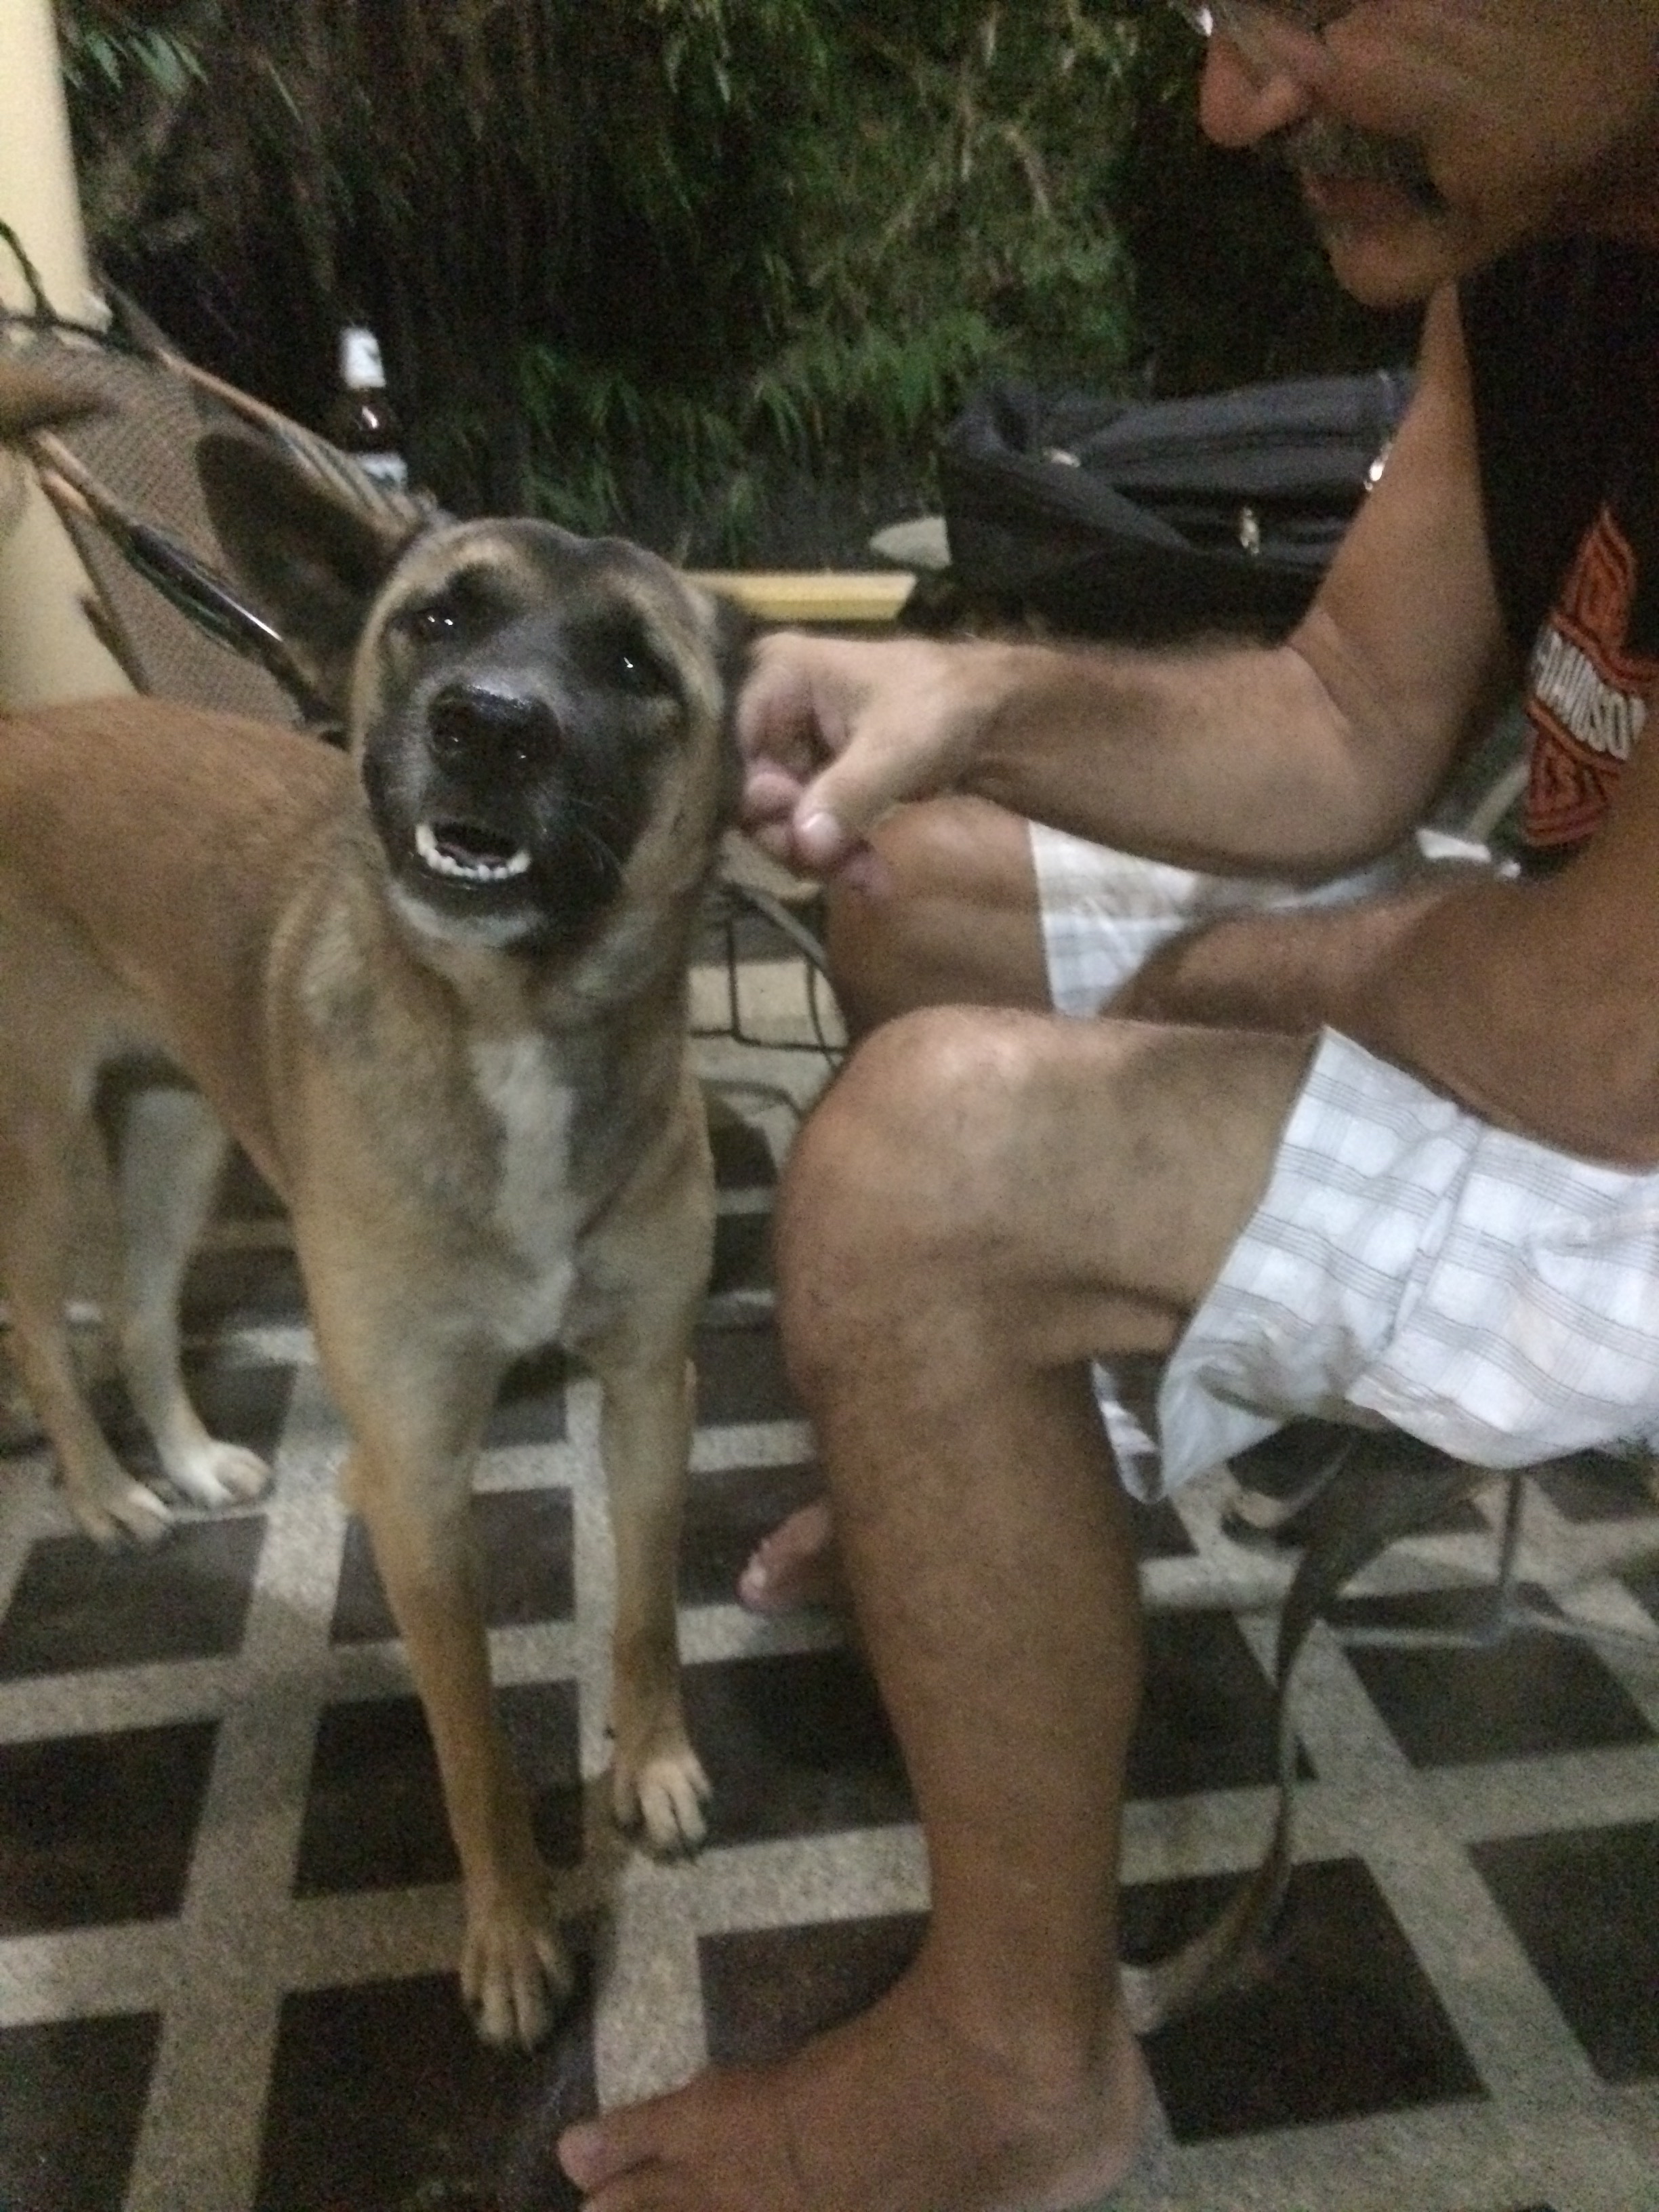 Soi means "street" in Thai. The soi dogs here are so friendly and we're bribing them with food for their company. 